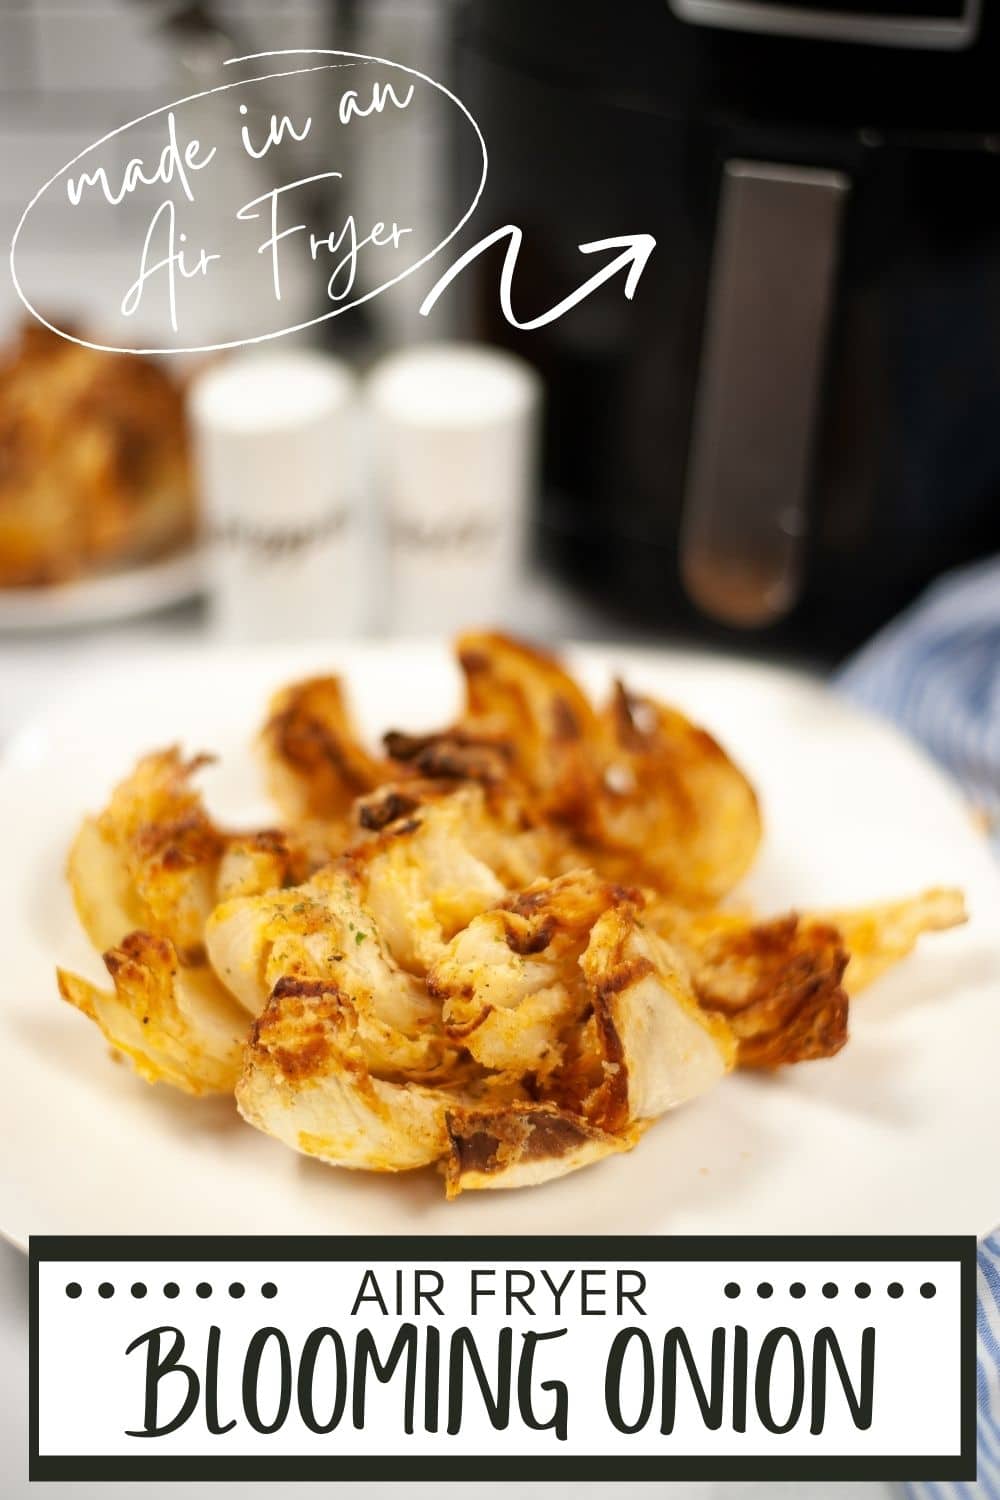 Skip the calories and fat but enjoy the delicious, crispy goodness of this popular appetizer with this Air Fryer Blooming Onion recipe. #airfryer #copycatrecipe #appetizer #bloominonion via @wondermomwannab